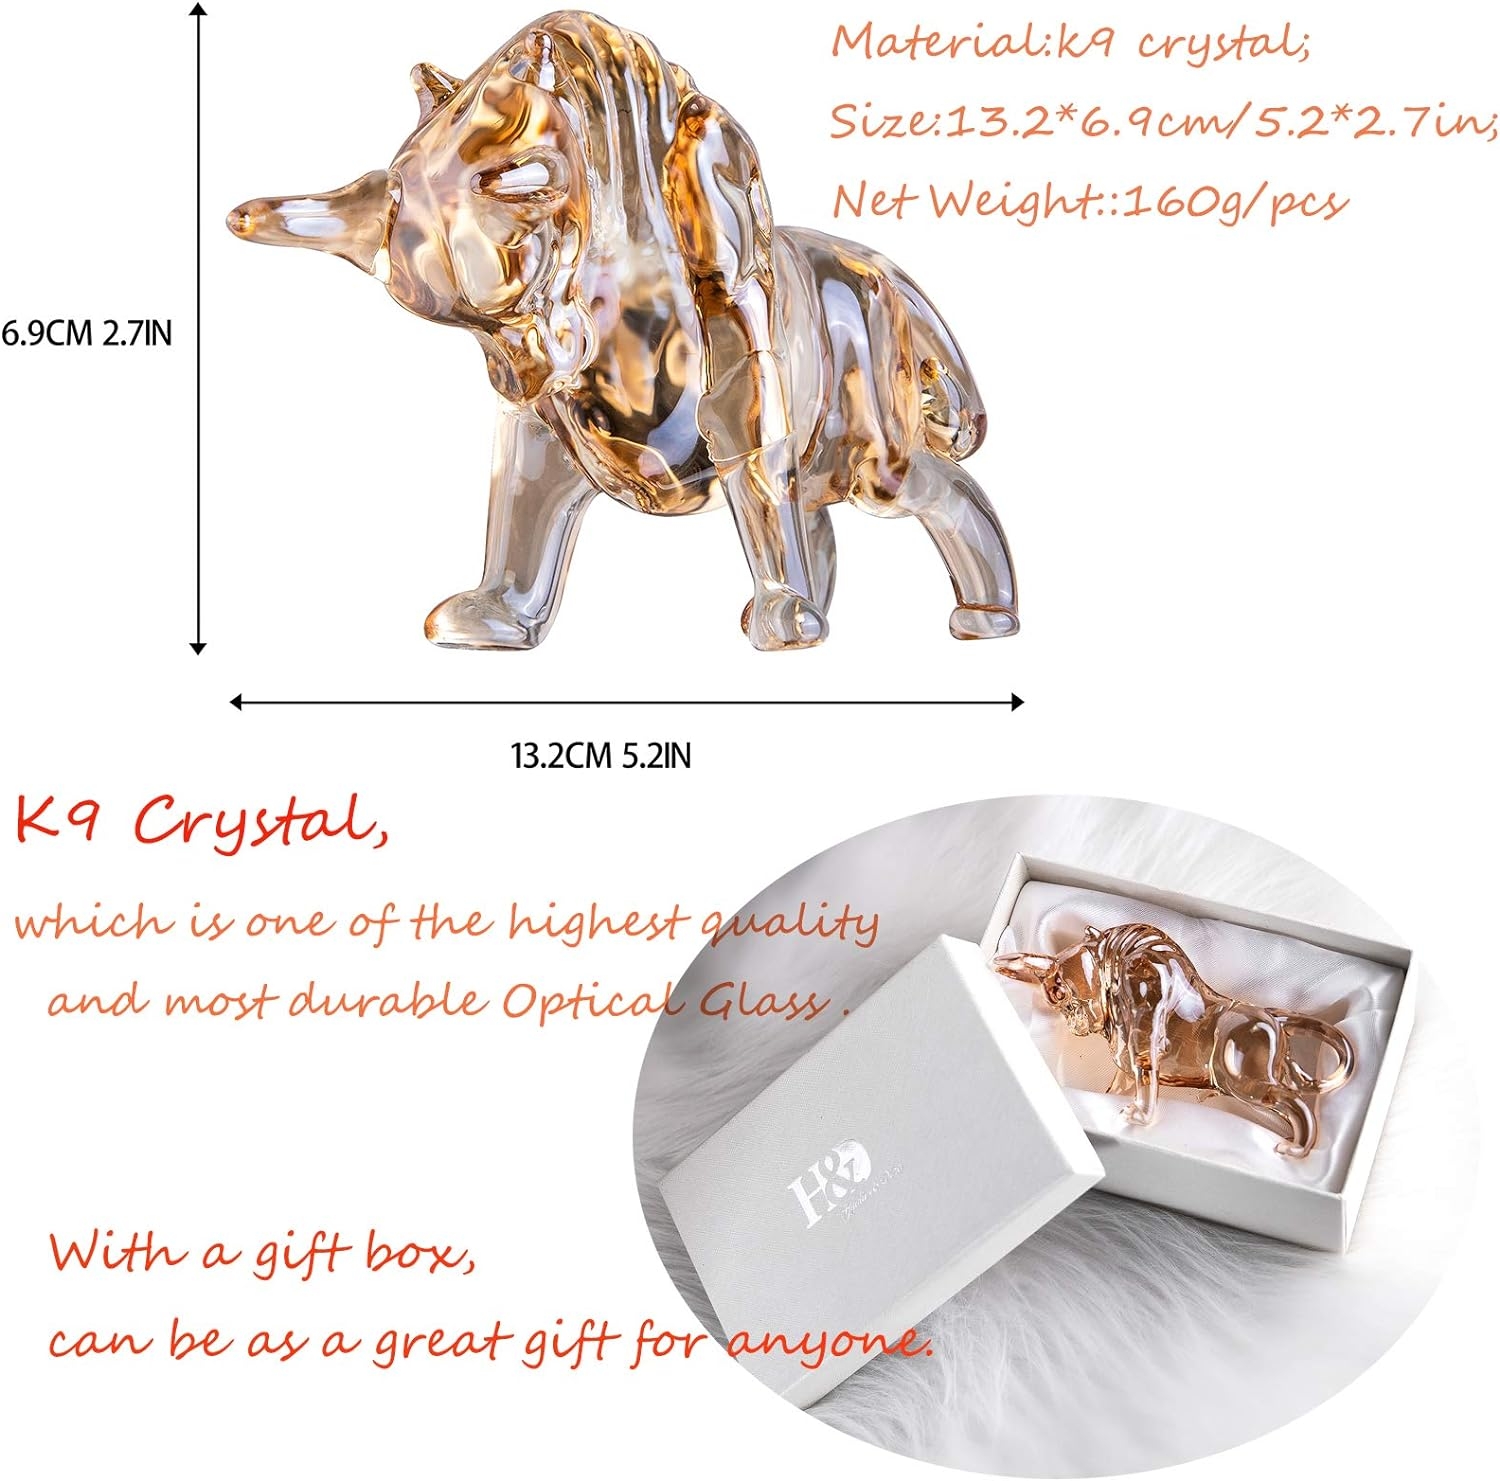 H&D HYALINE & DORA Charm and Lucky FengShui Crystal Statues Wall Street Bull Figurine Sculpture Home Office Desk Decorative Ornament